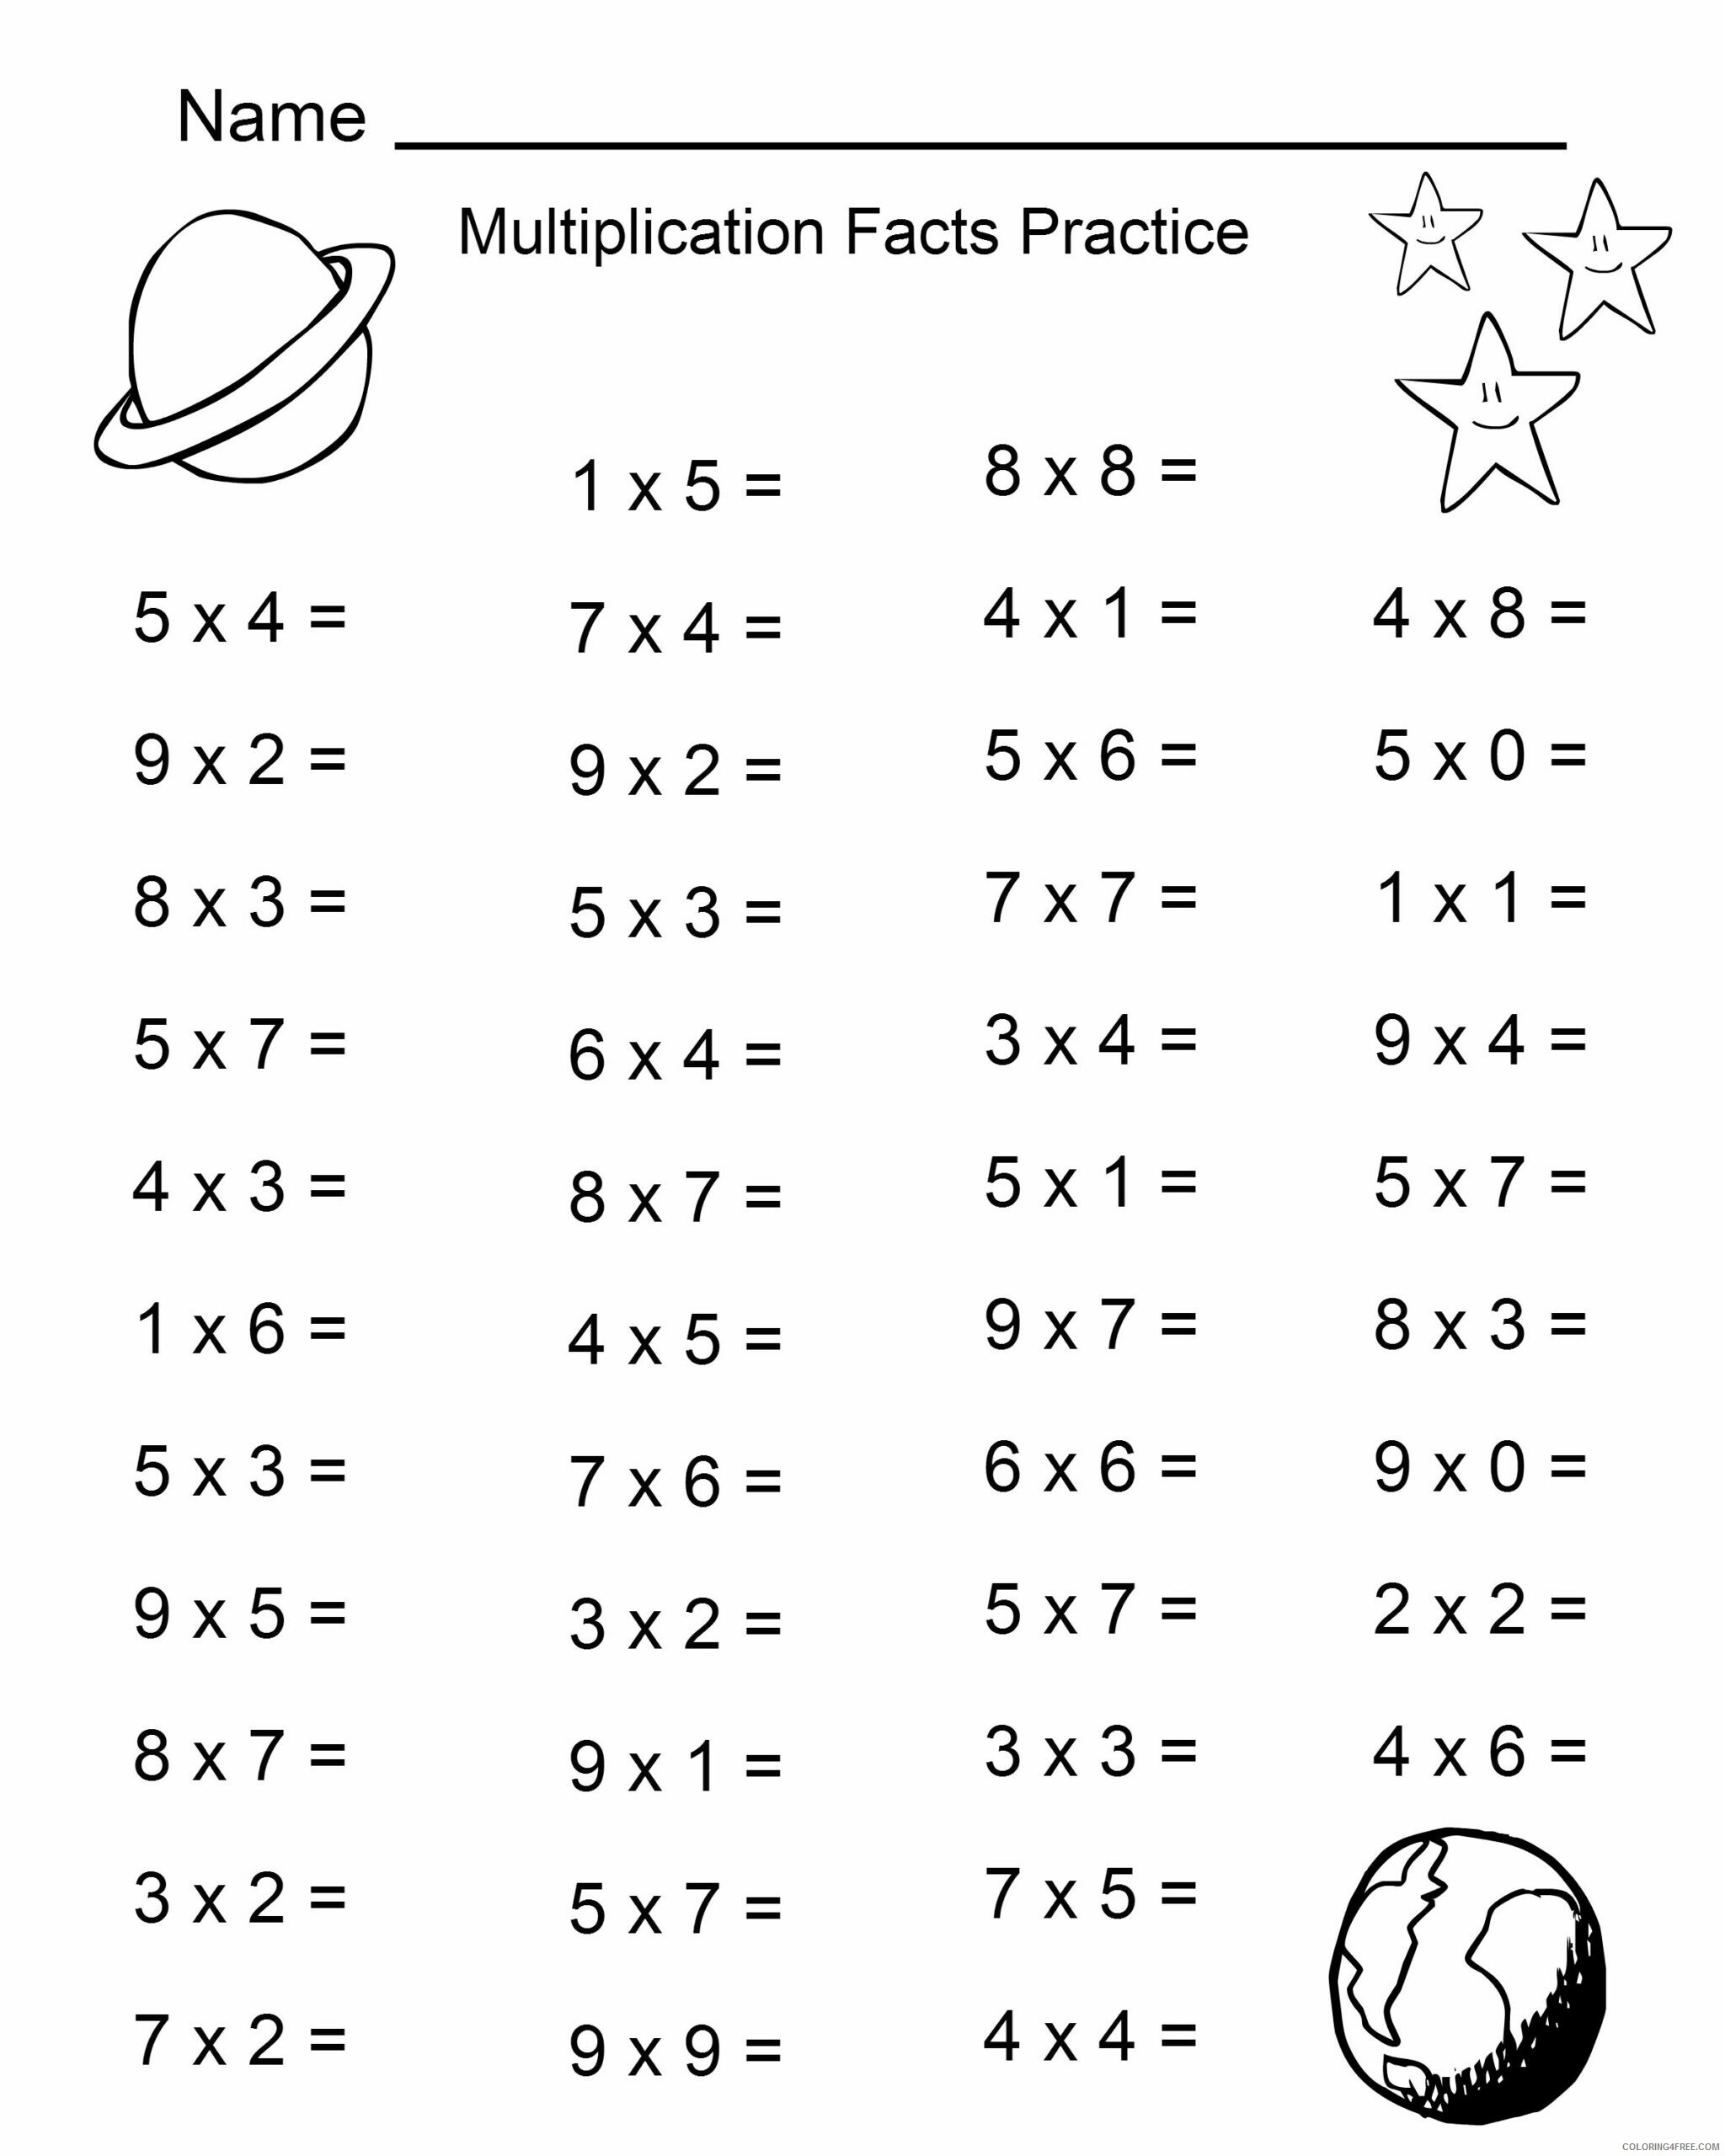 4th Grade Coloring Pages Educational Math Multiplication Facts Printable 2020 0317 Coloring4free